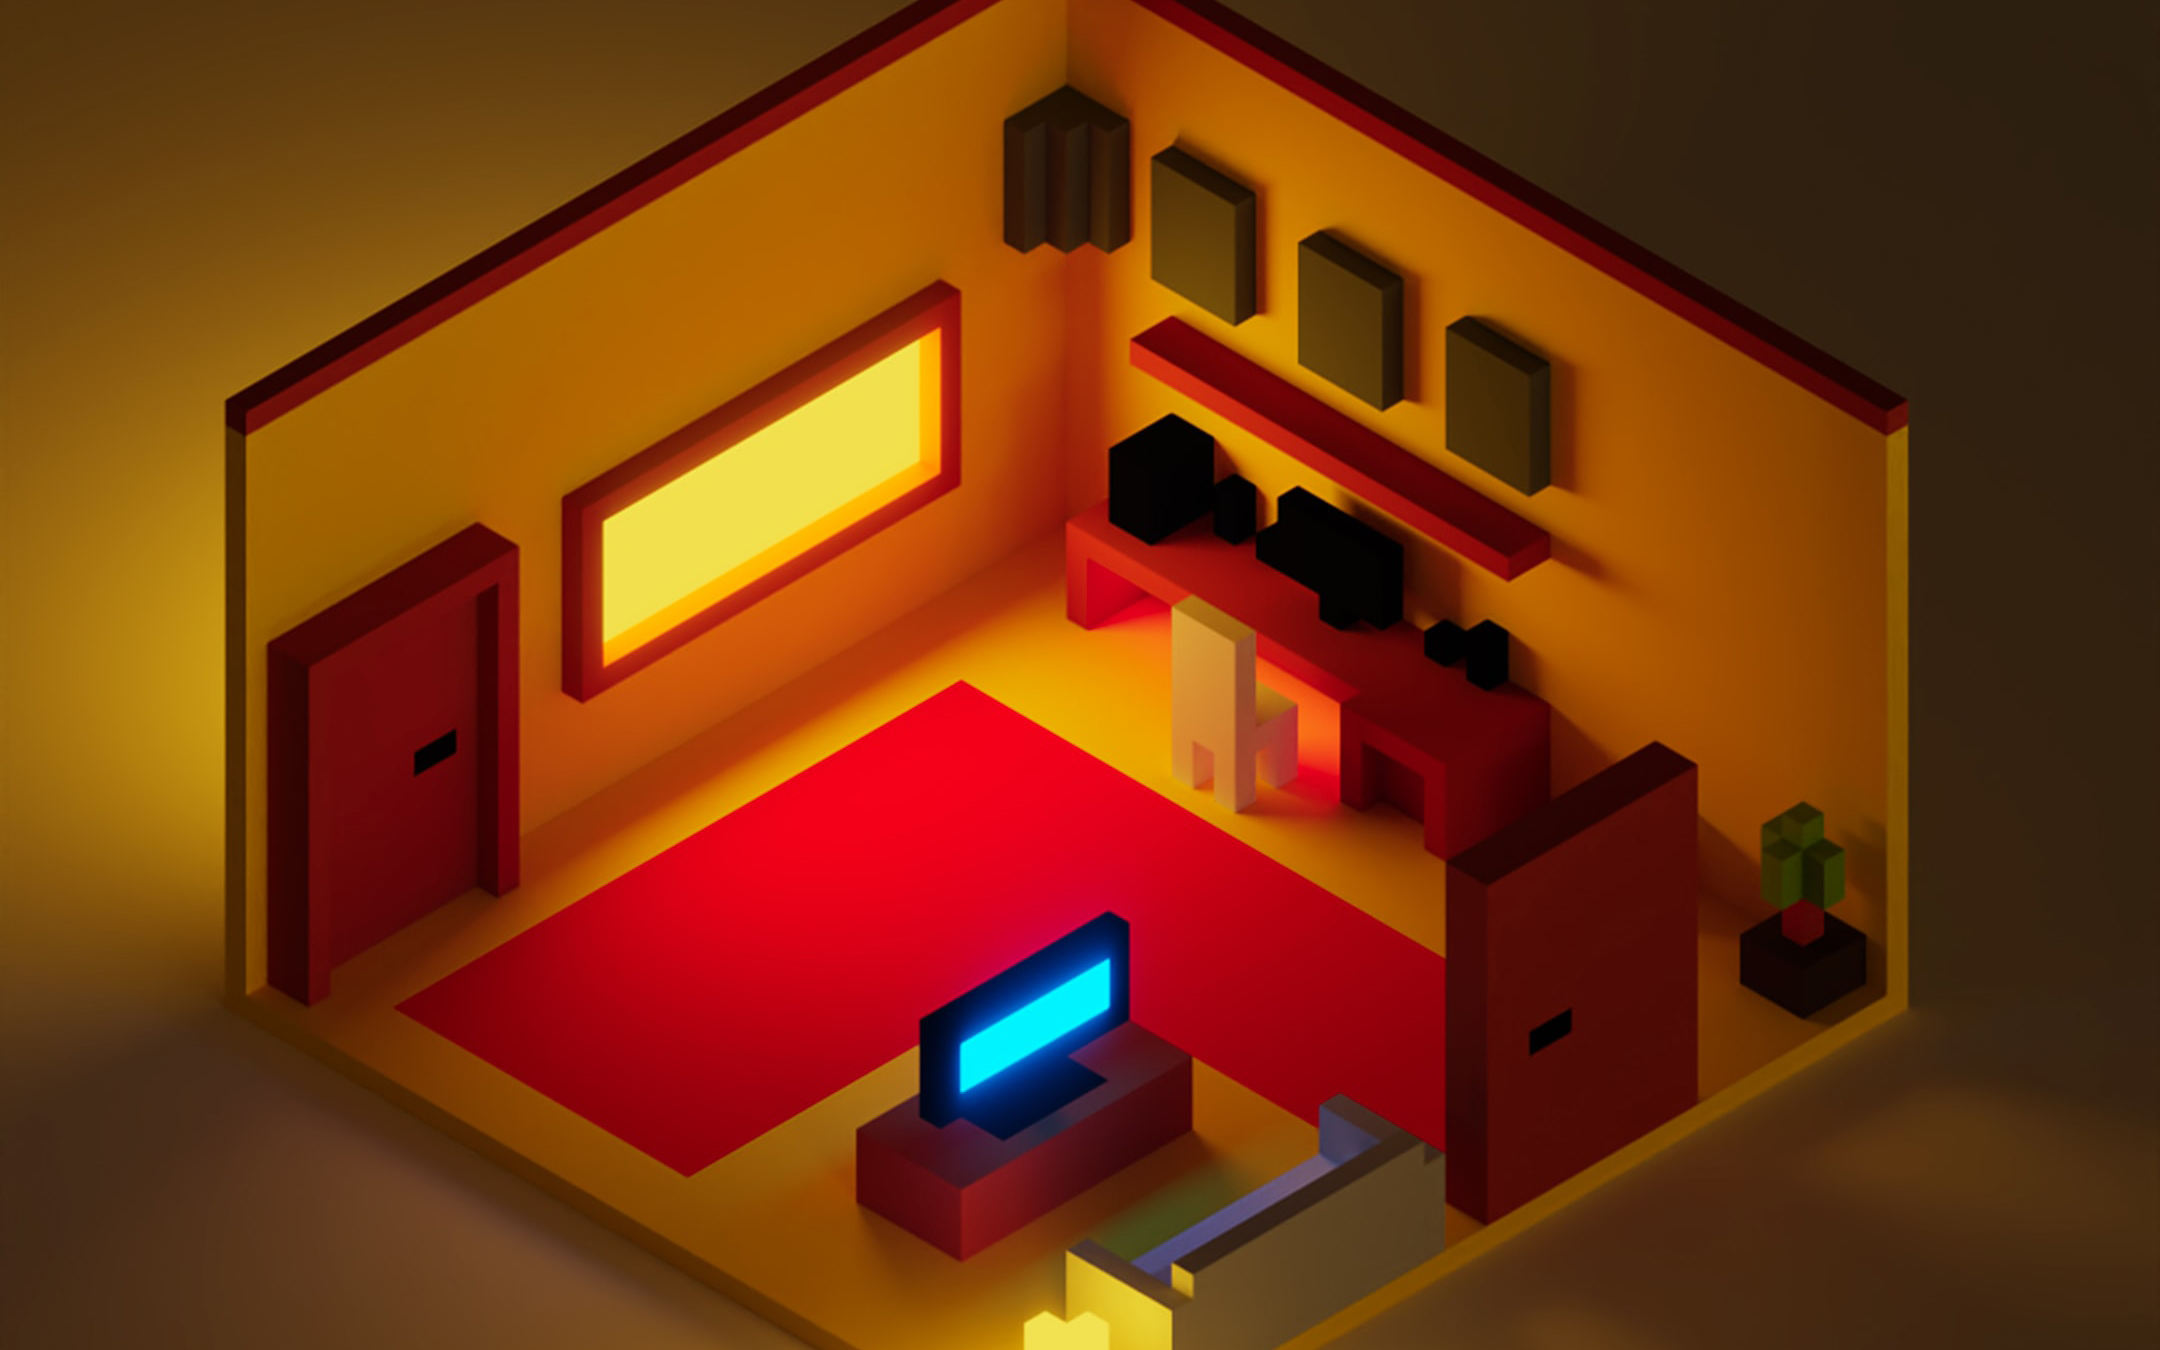 Voxel graphic showing a room with TV